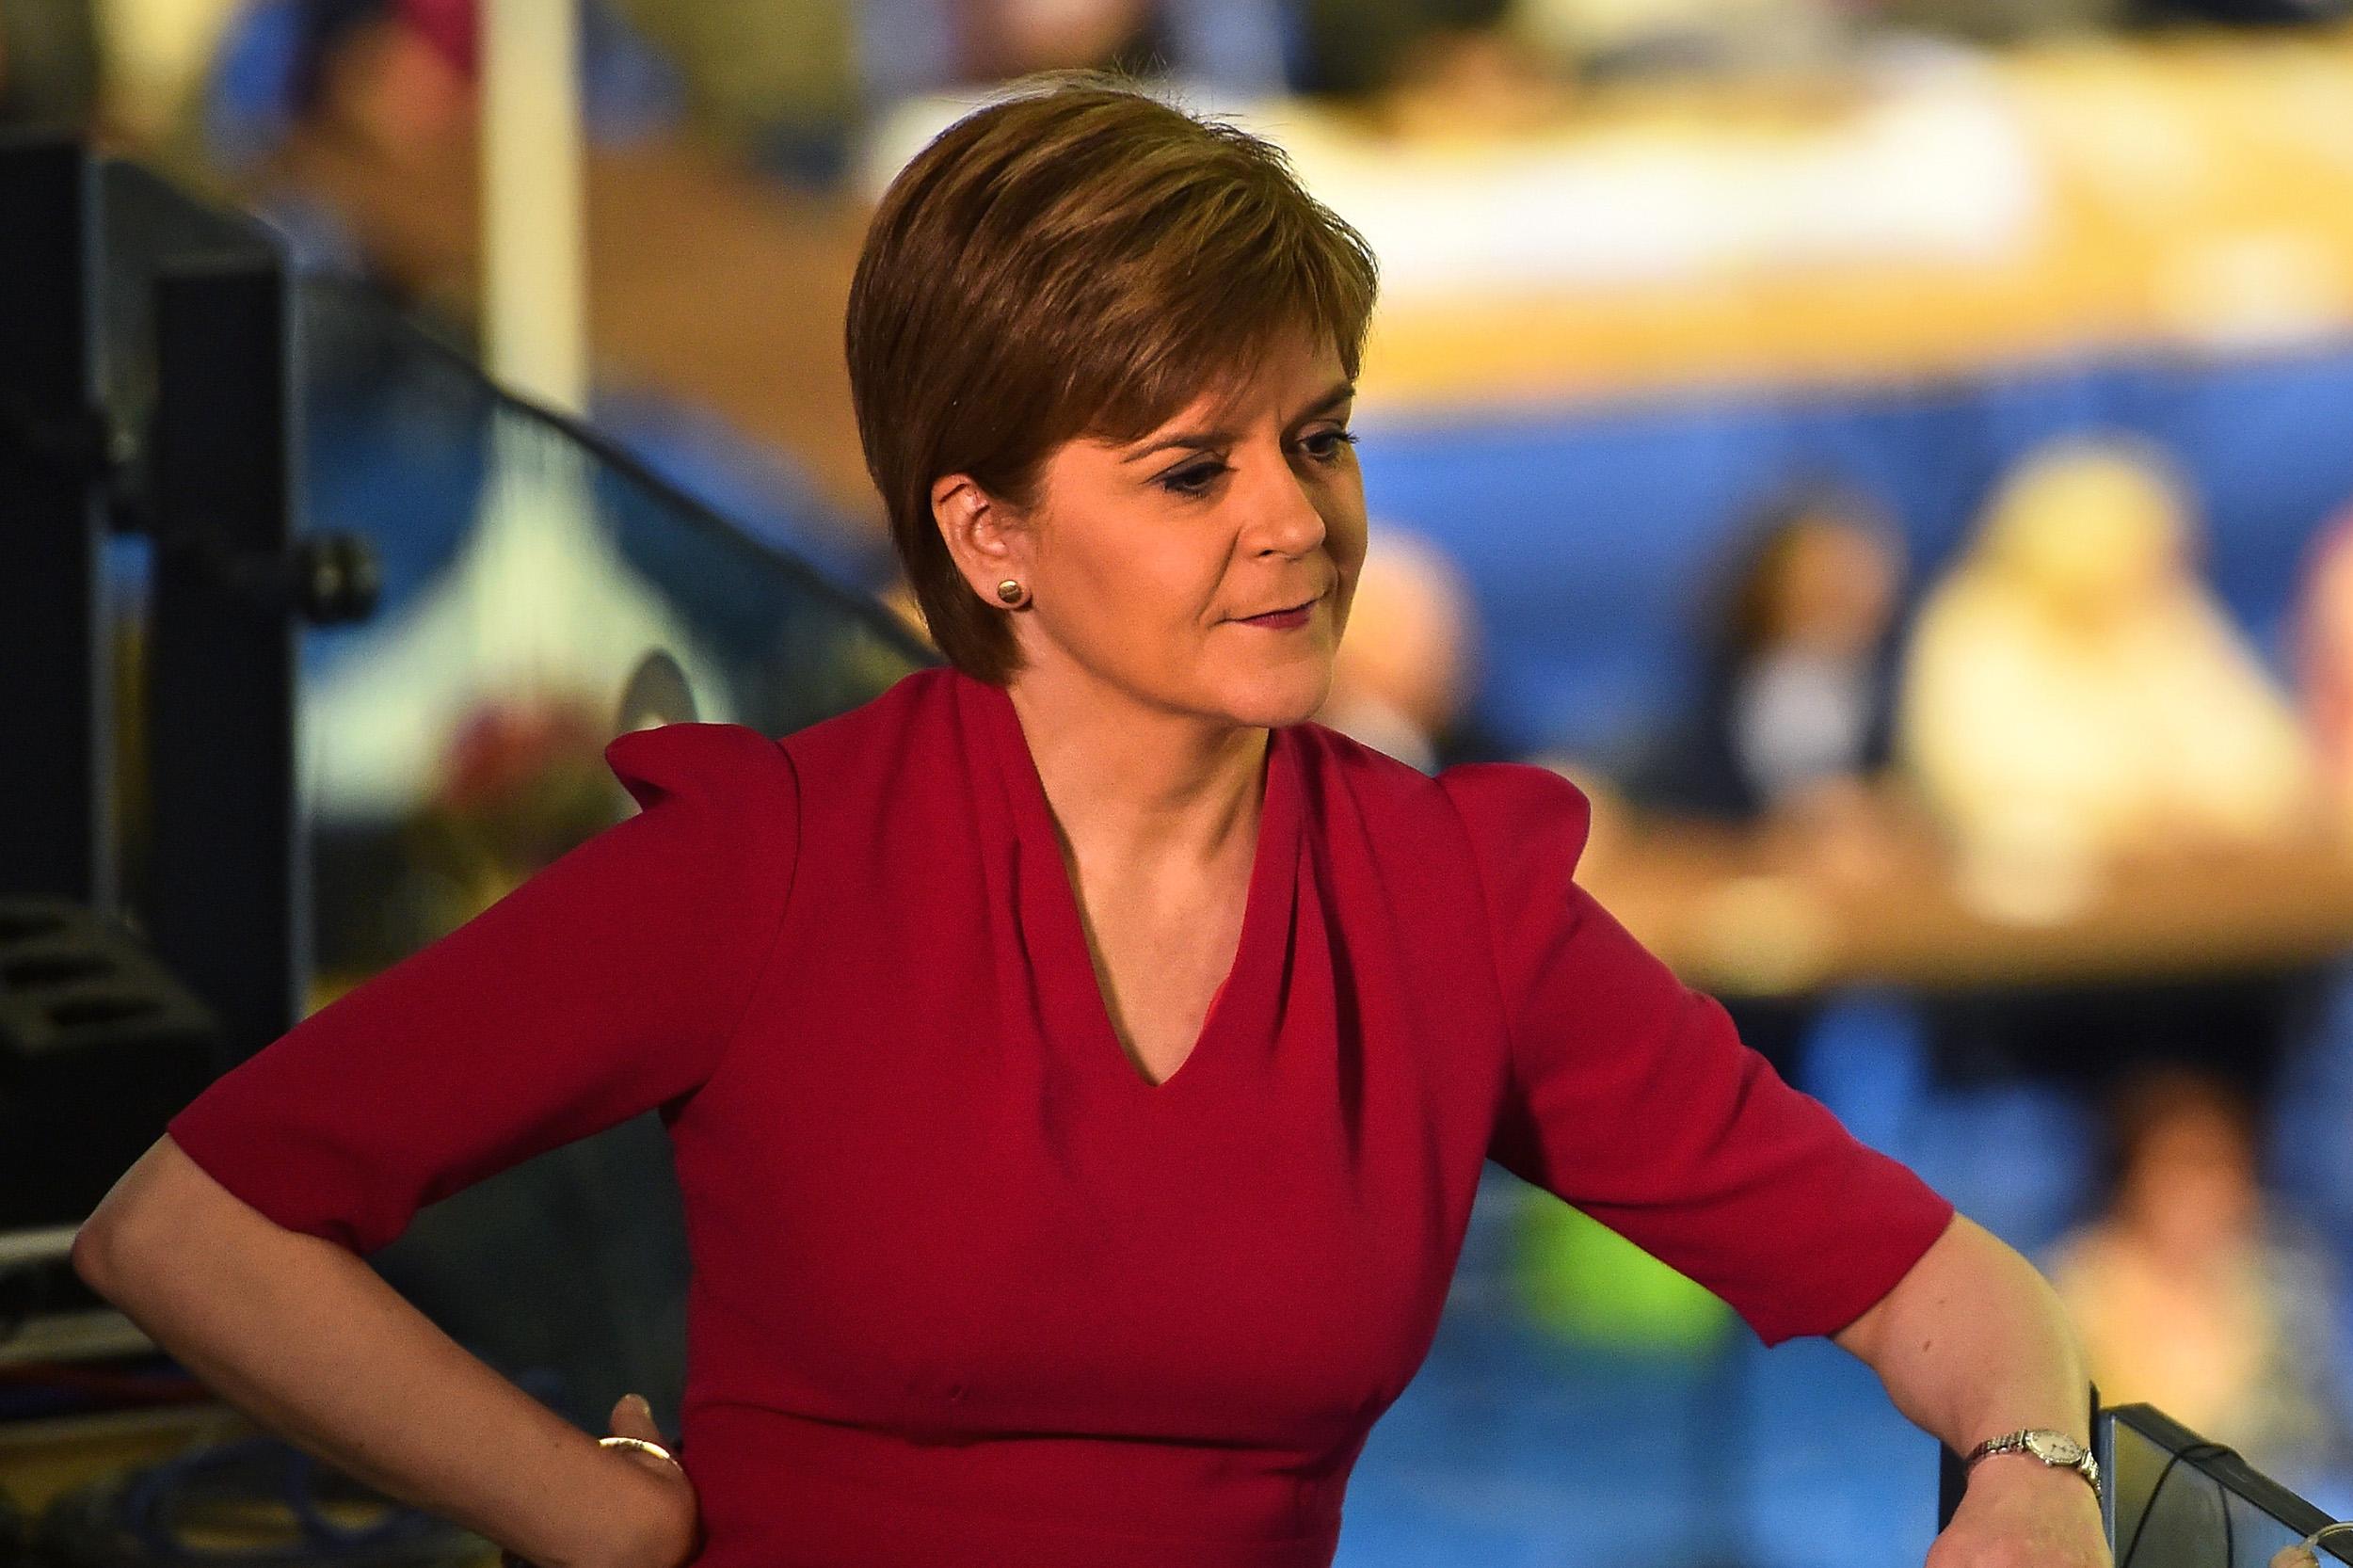 Nicola Sturgeon said the commission's report would 'restart the debate' on Scottish independence